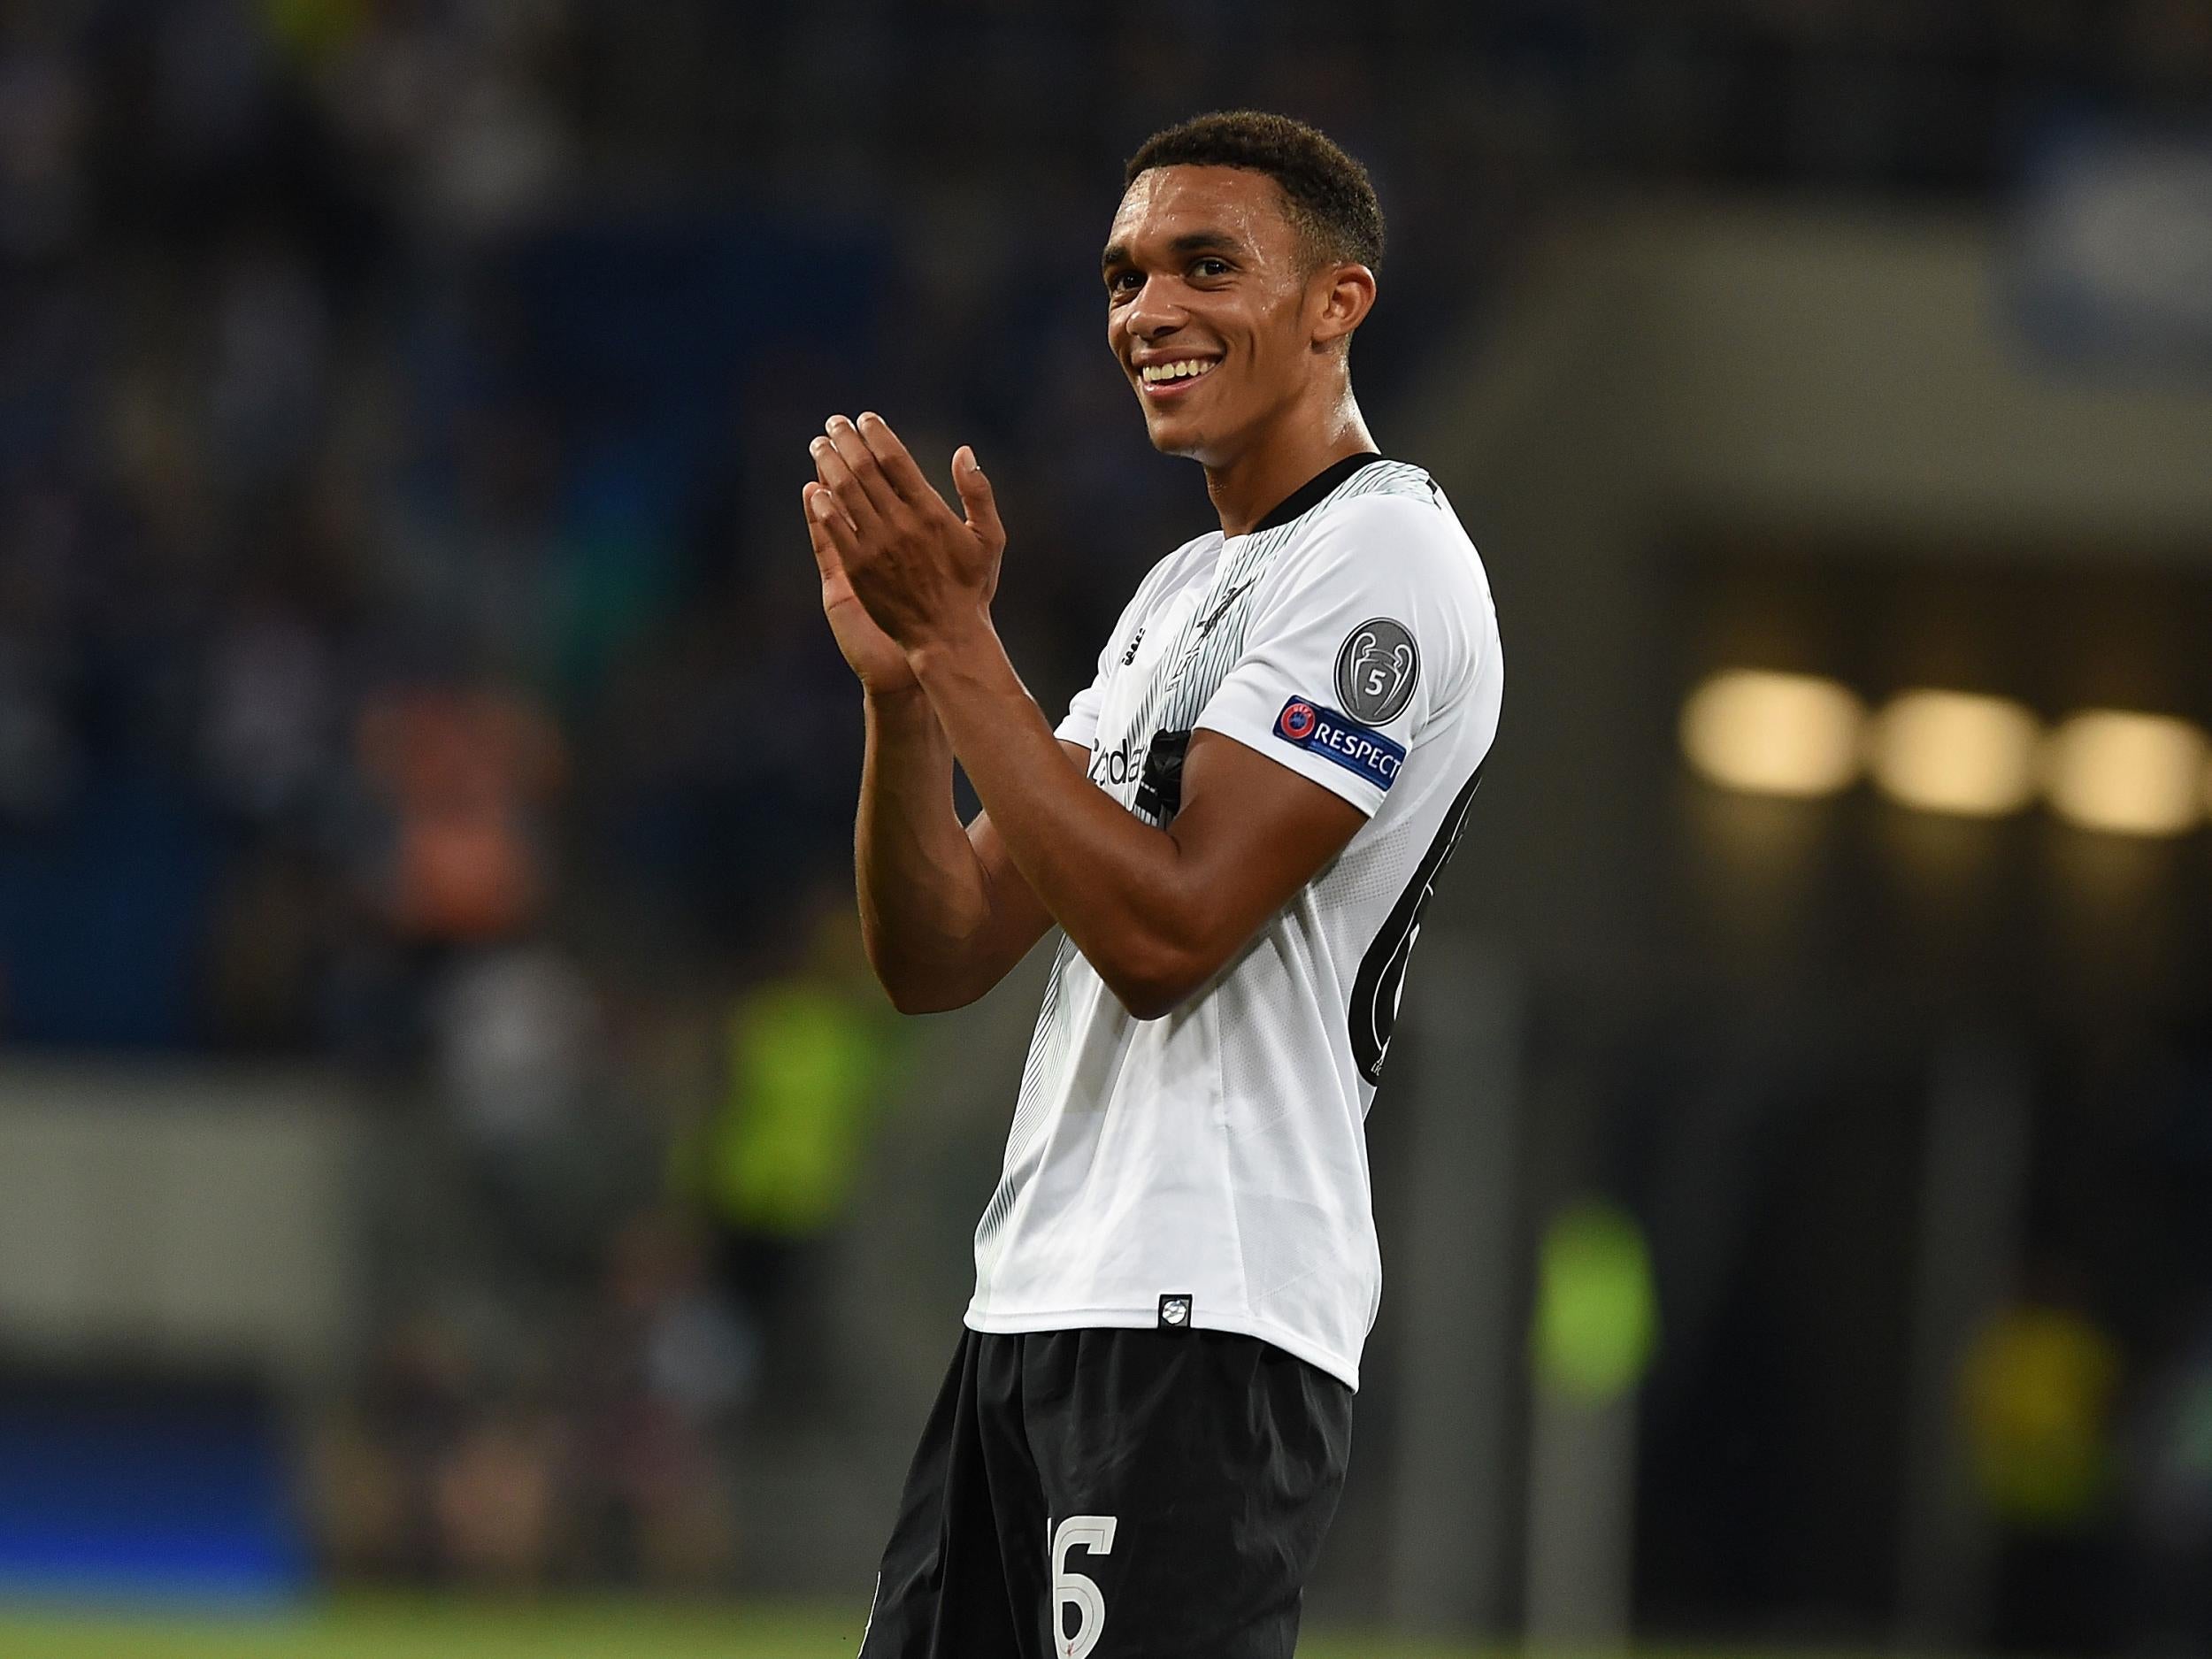 Trent Alexander-Arnold had a night to remember against Hoffenheim